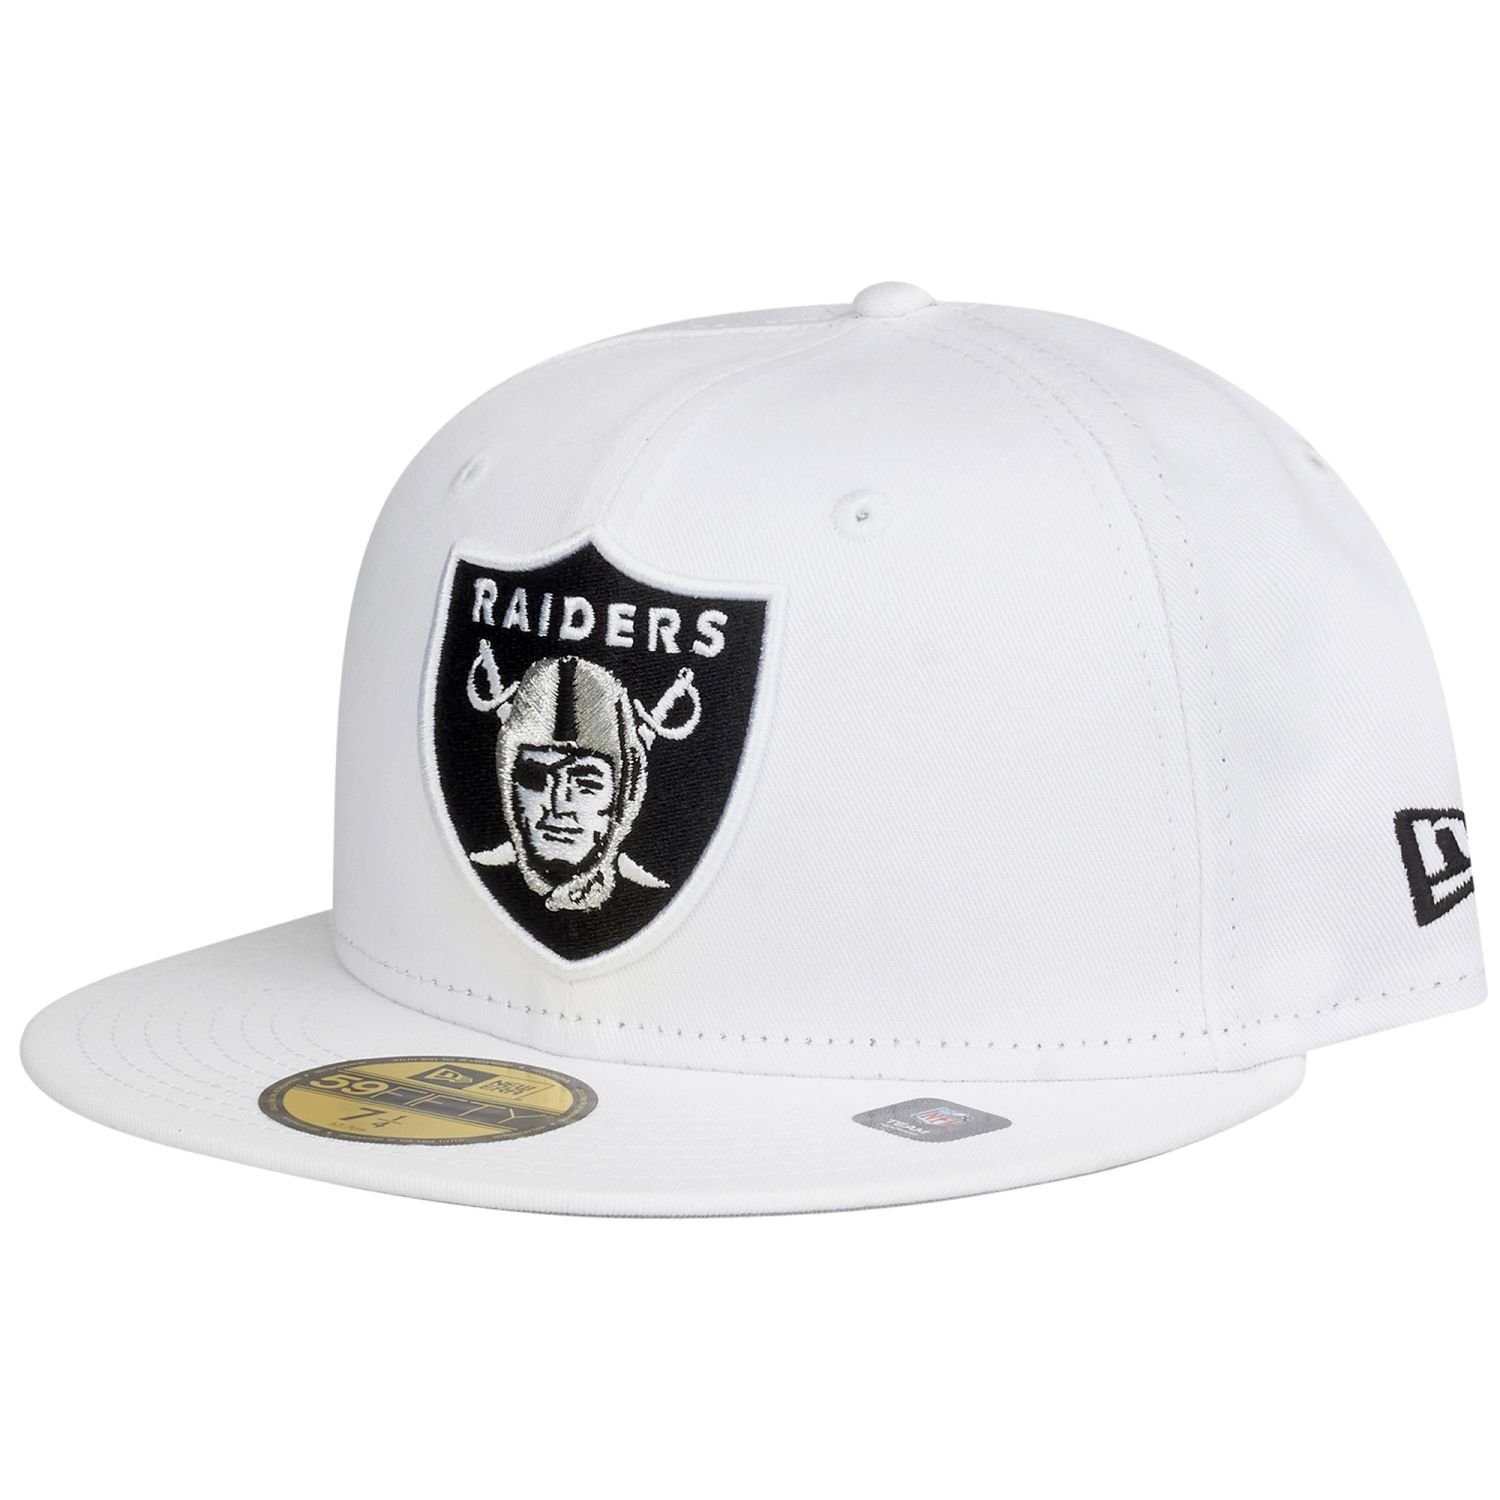 New Las Fitted TWILL Era Vegas Cap SANDED 59Fifty Raiders